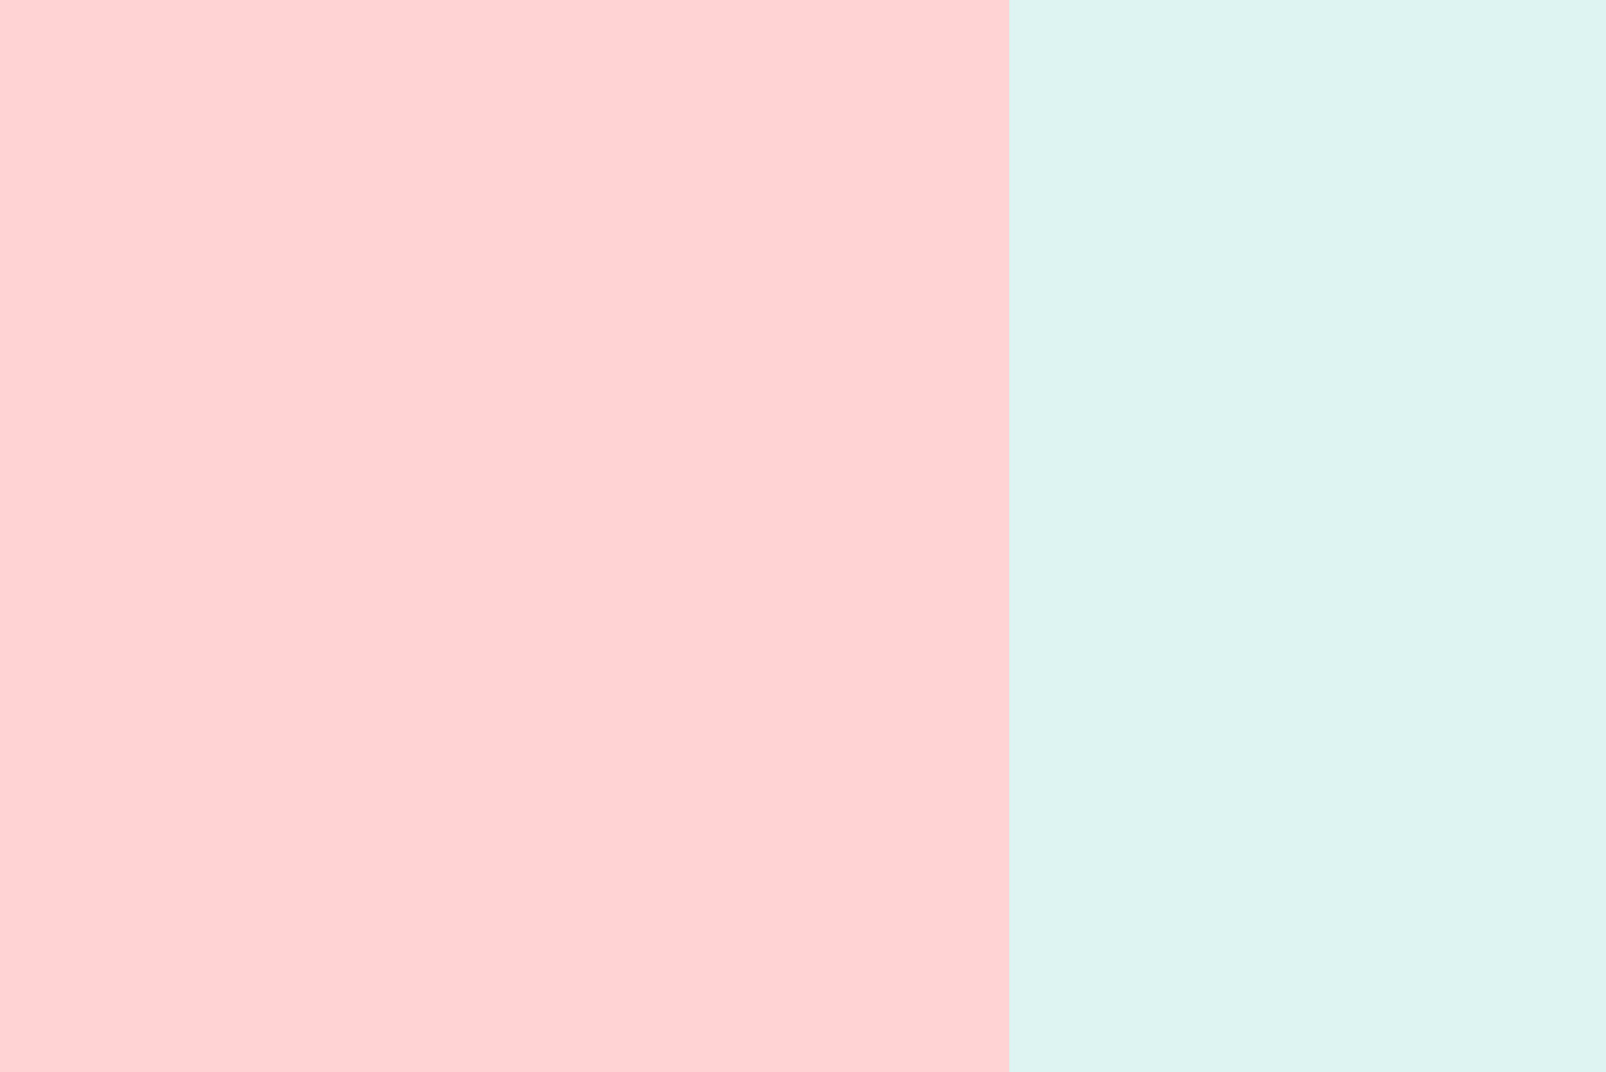 Pastel pink and blue background